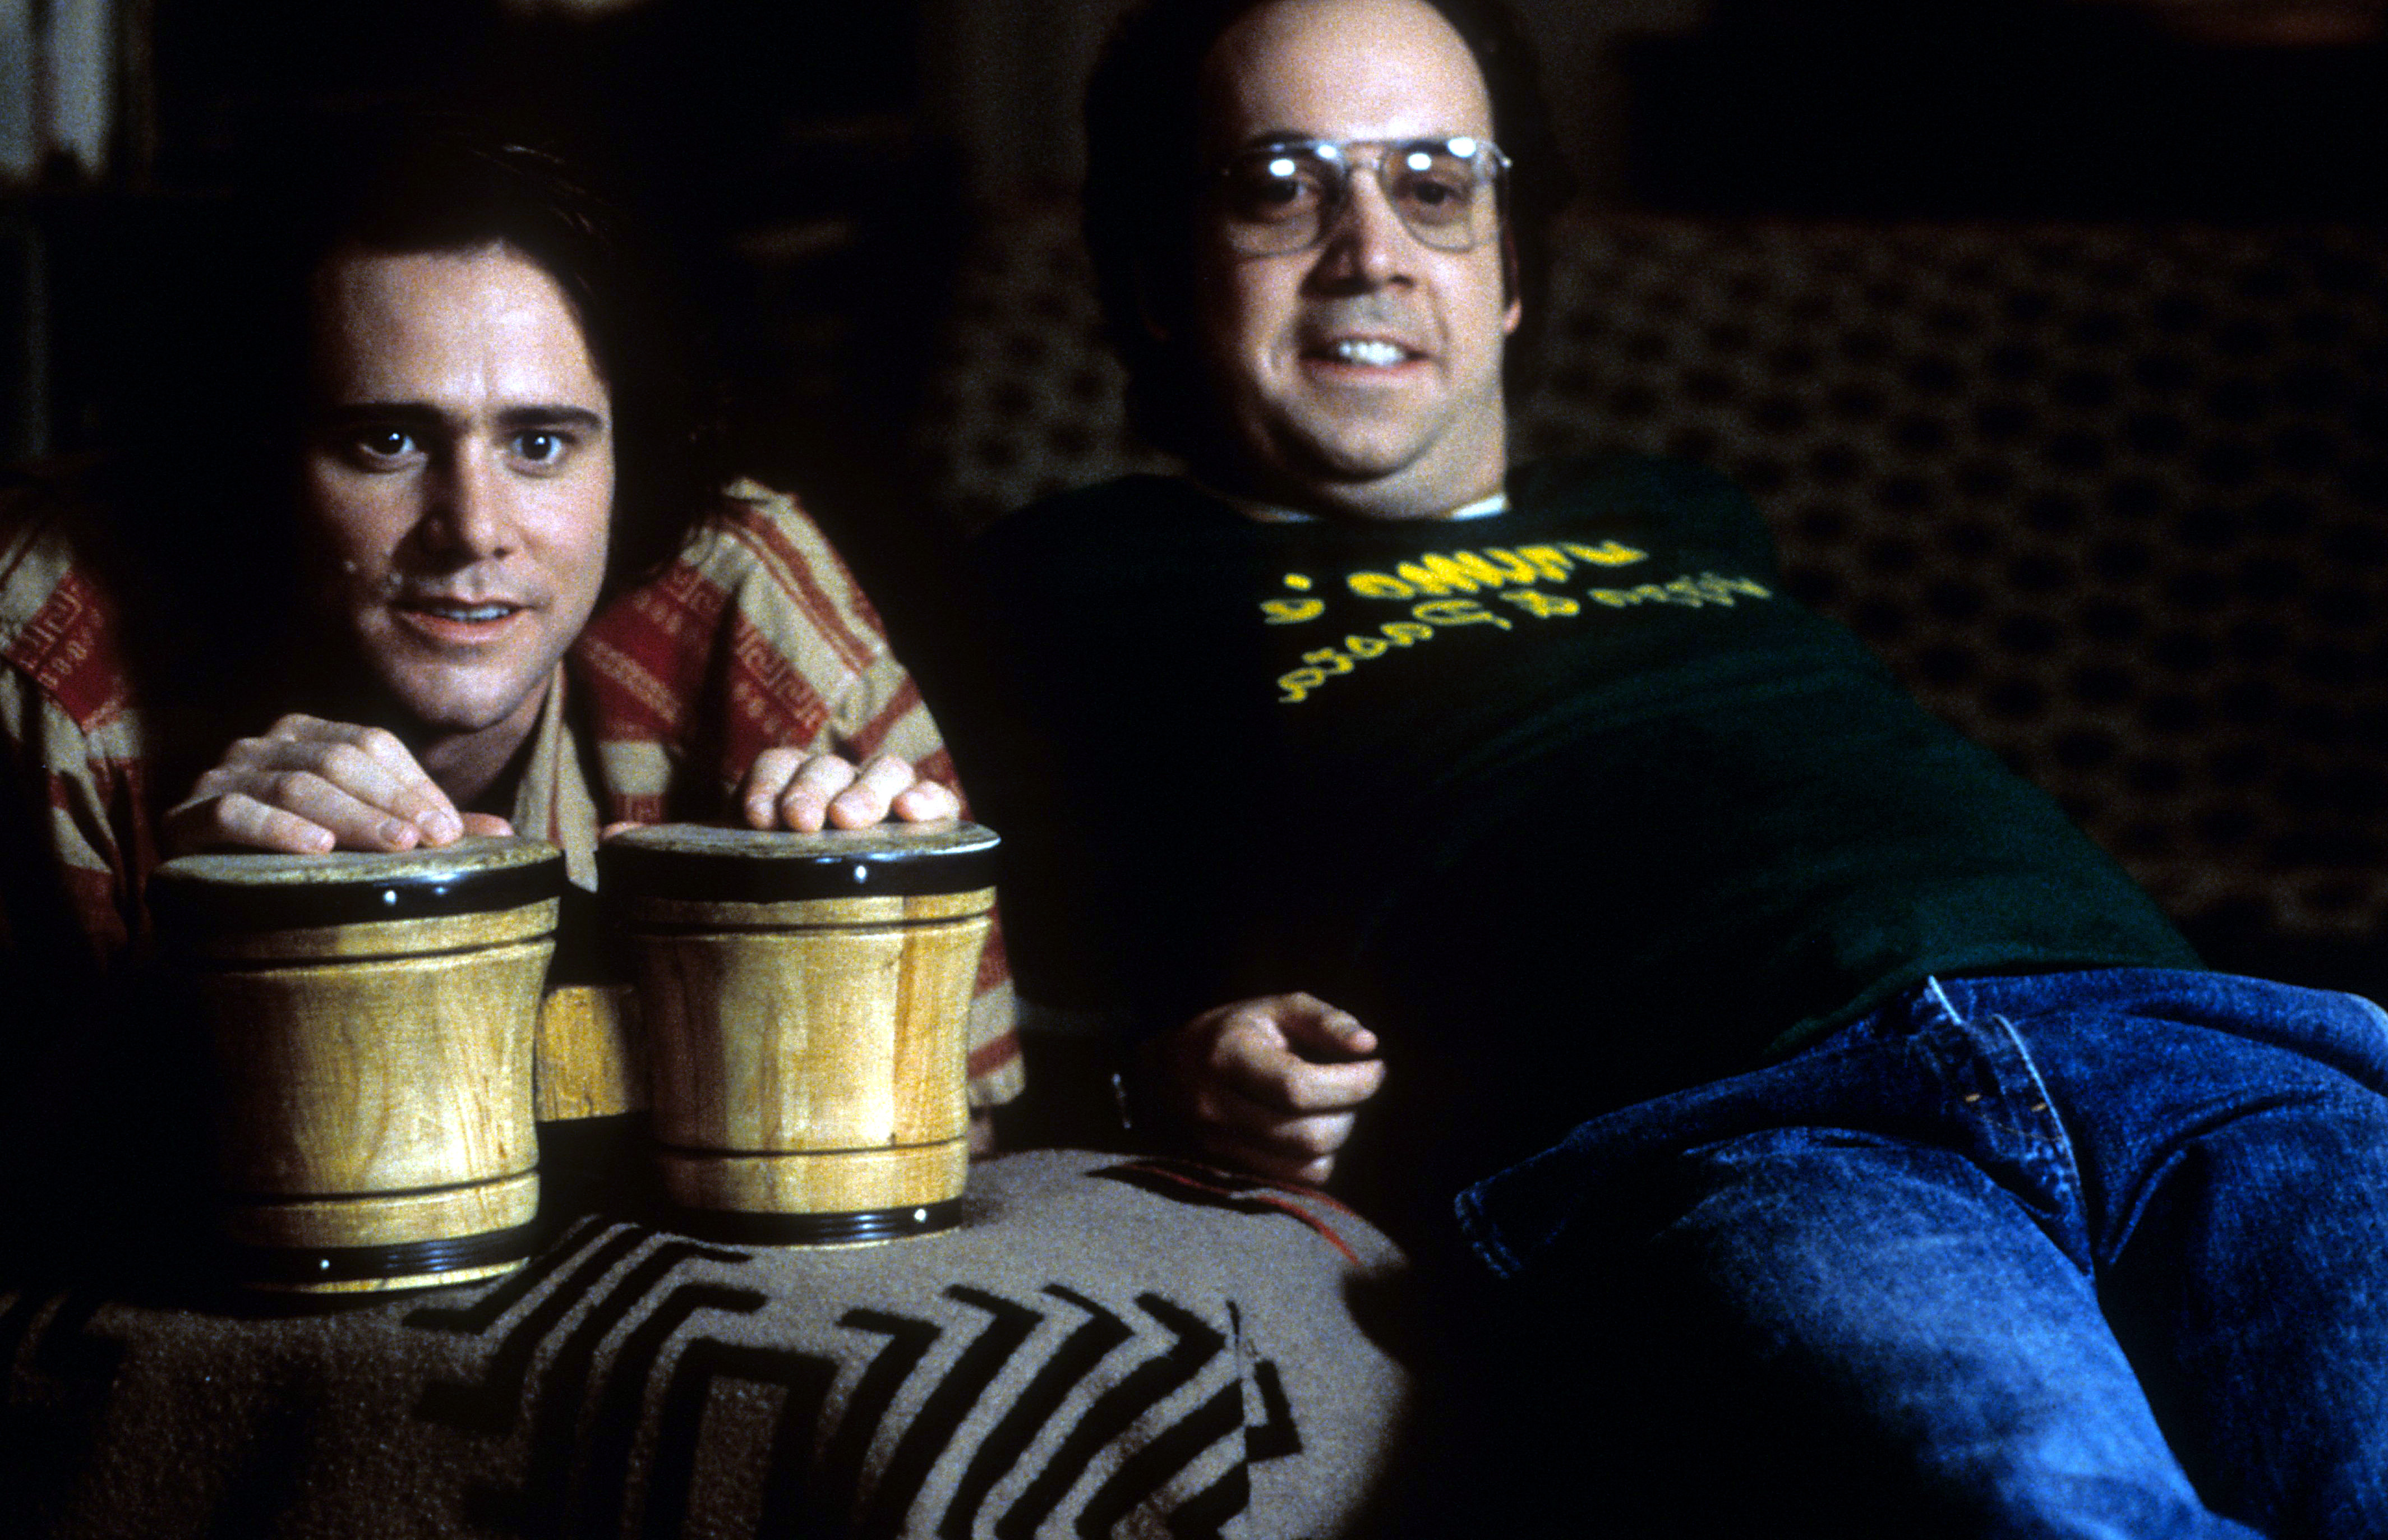 Jim Carrey with bongos next to Paul Giamatti in a scene from the film 'Man On The Moon', 1999. (Photo by Universal/Getty Images)